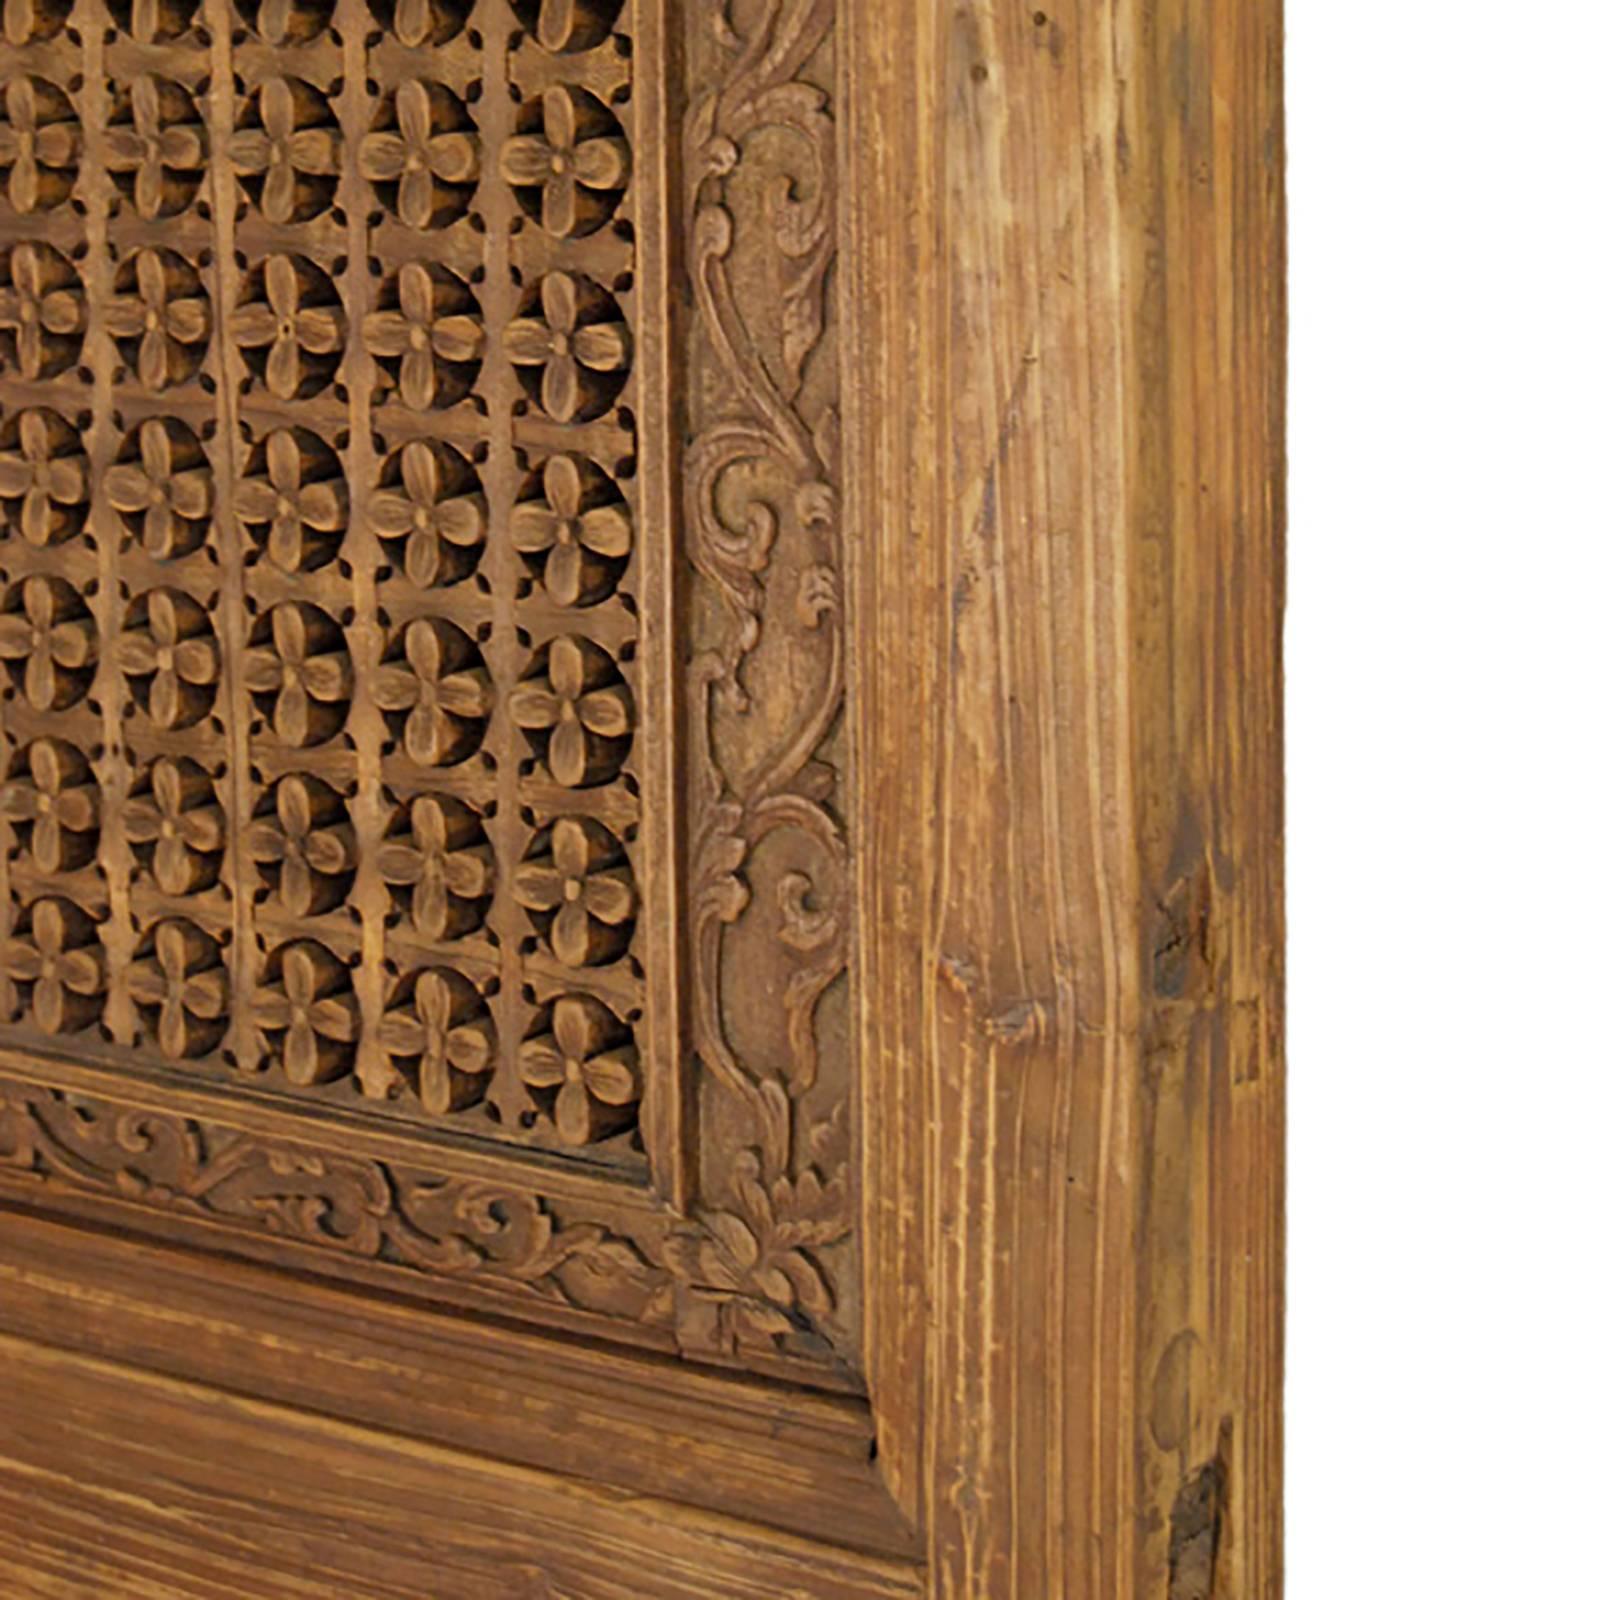 Hand-Carved Pair of Chinese Lattice Paneled Doors